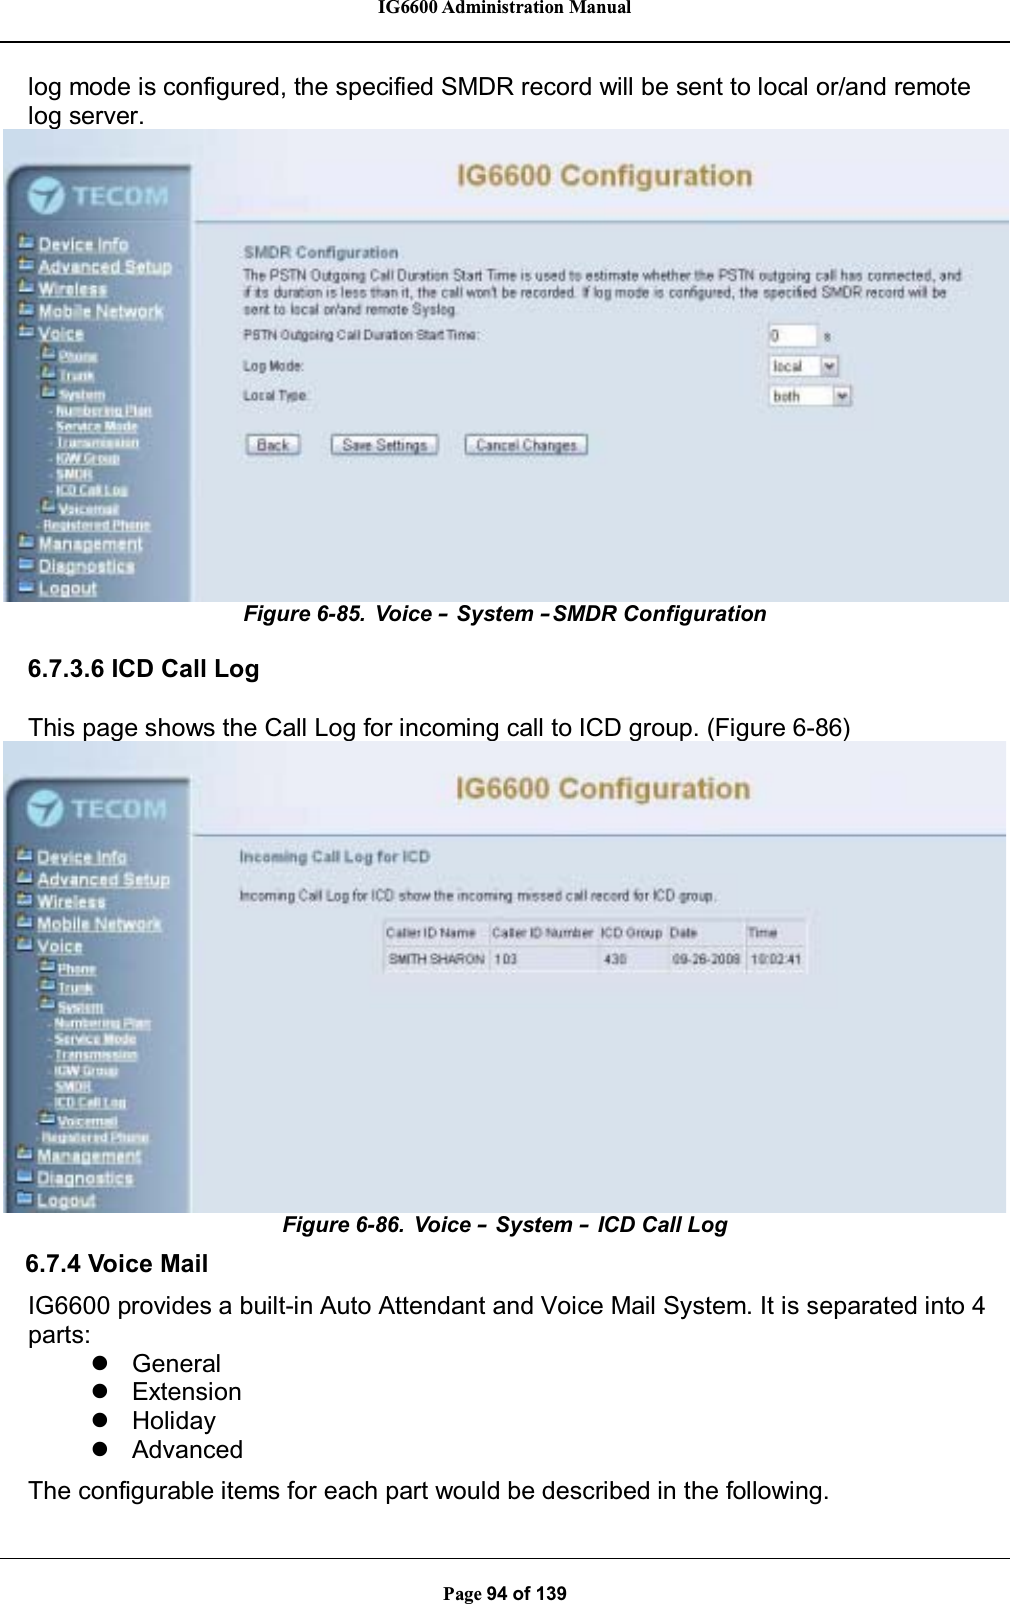 IG6600 Administration ManualPage 94 of 139log mode is configured, the specified SMDR record will be sent to local or/and remotelog server.Figure 6-85. Voice –System –SMDR Configuration6.7.3.6 ICD Call LogThis page shows the Call Log for incoming call to ICD group. (Figure 6-86)Figure 6-86. Voice –System –ICD Call Log6.7.4 Voice MailIG6600 provides a built-in Auto Attendant and Voice Mail System. It is separated into 4parts:zGeneralzExtensionzHolidayzAdvancedThe configurable items for each part would be described in the following.